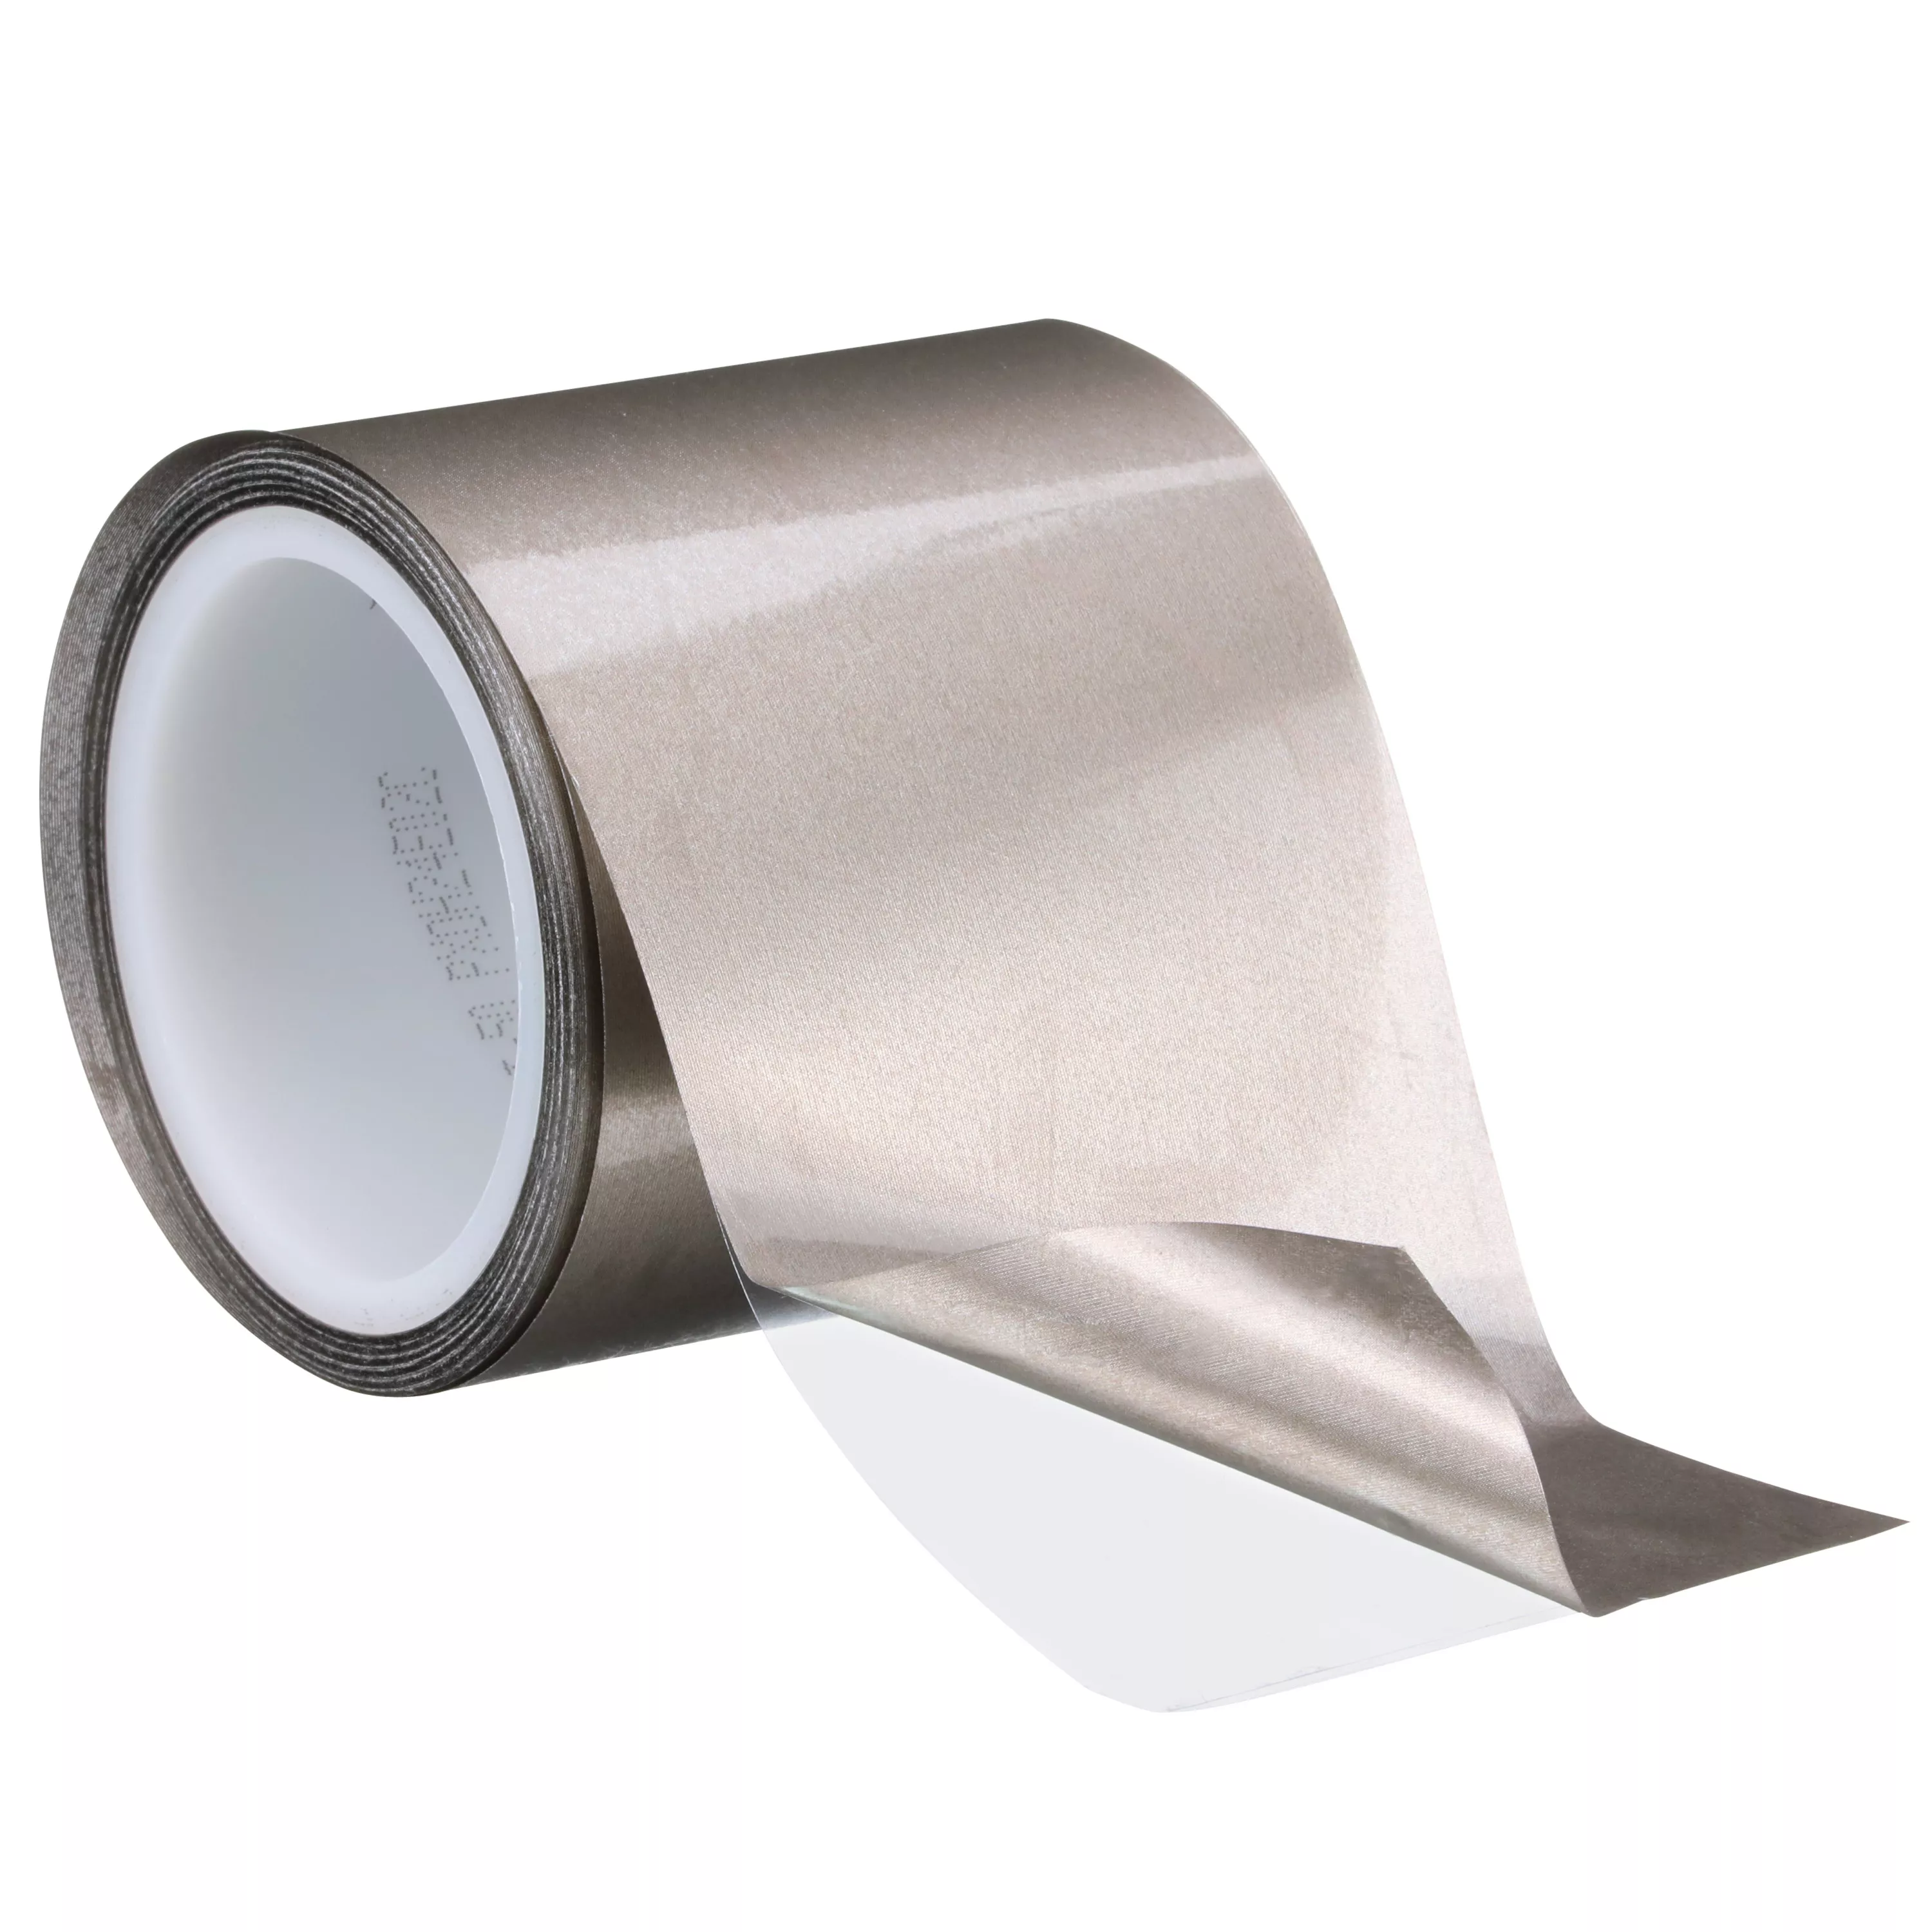 SKU 7100313598 | 3M™ Electrically Conductive Double-Sided Tape 5113DFT-50